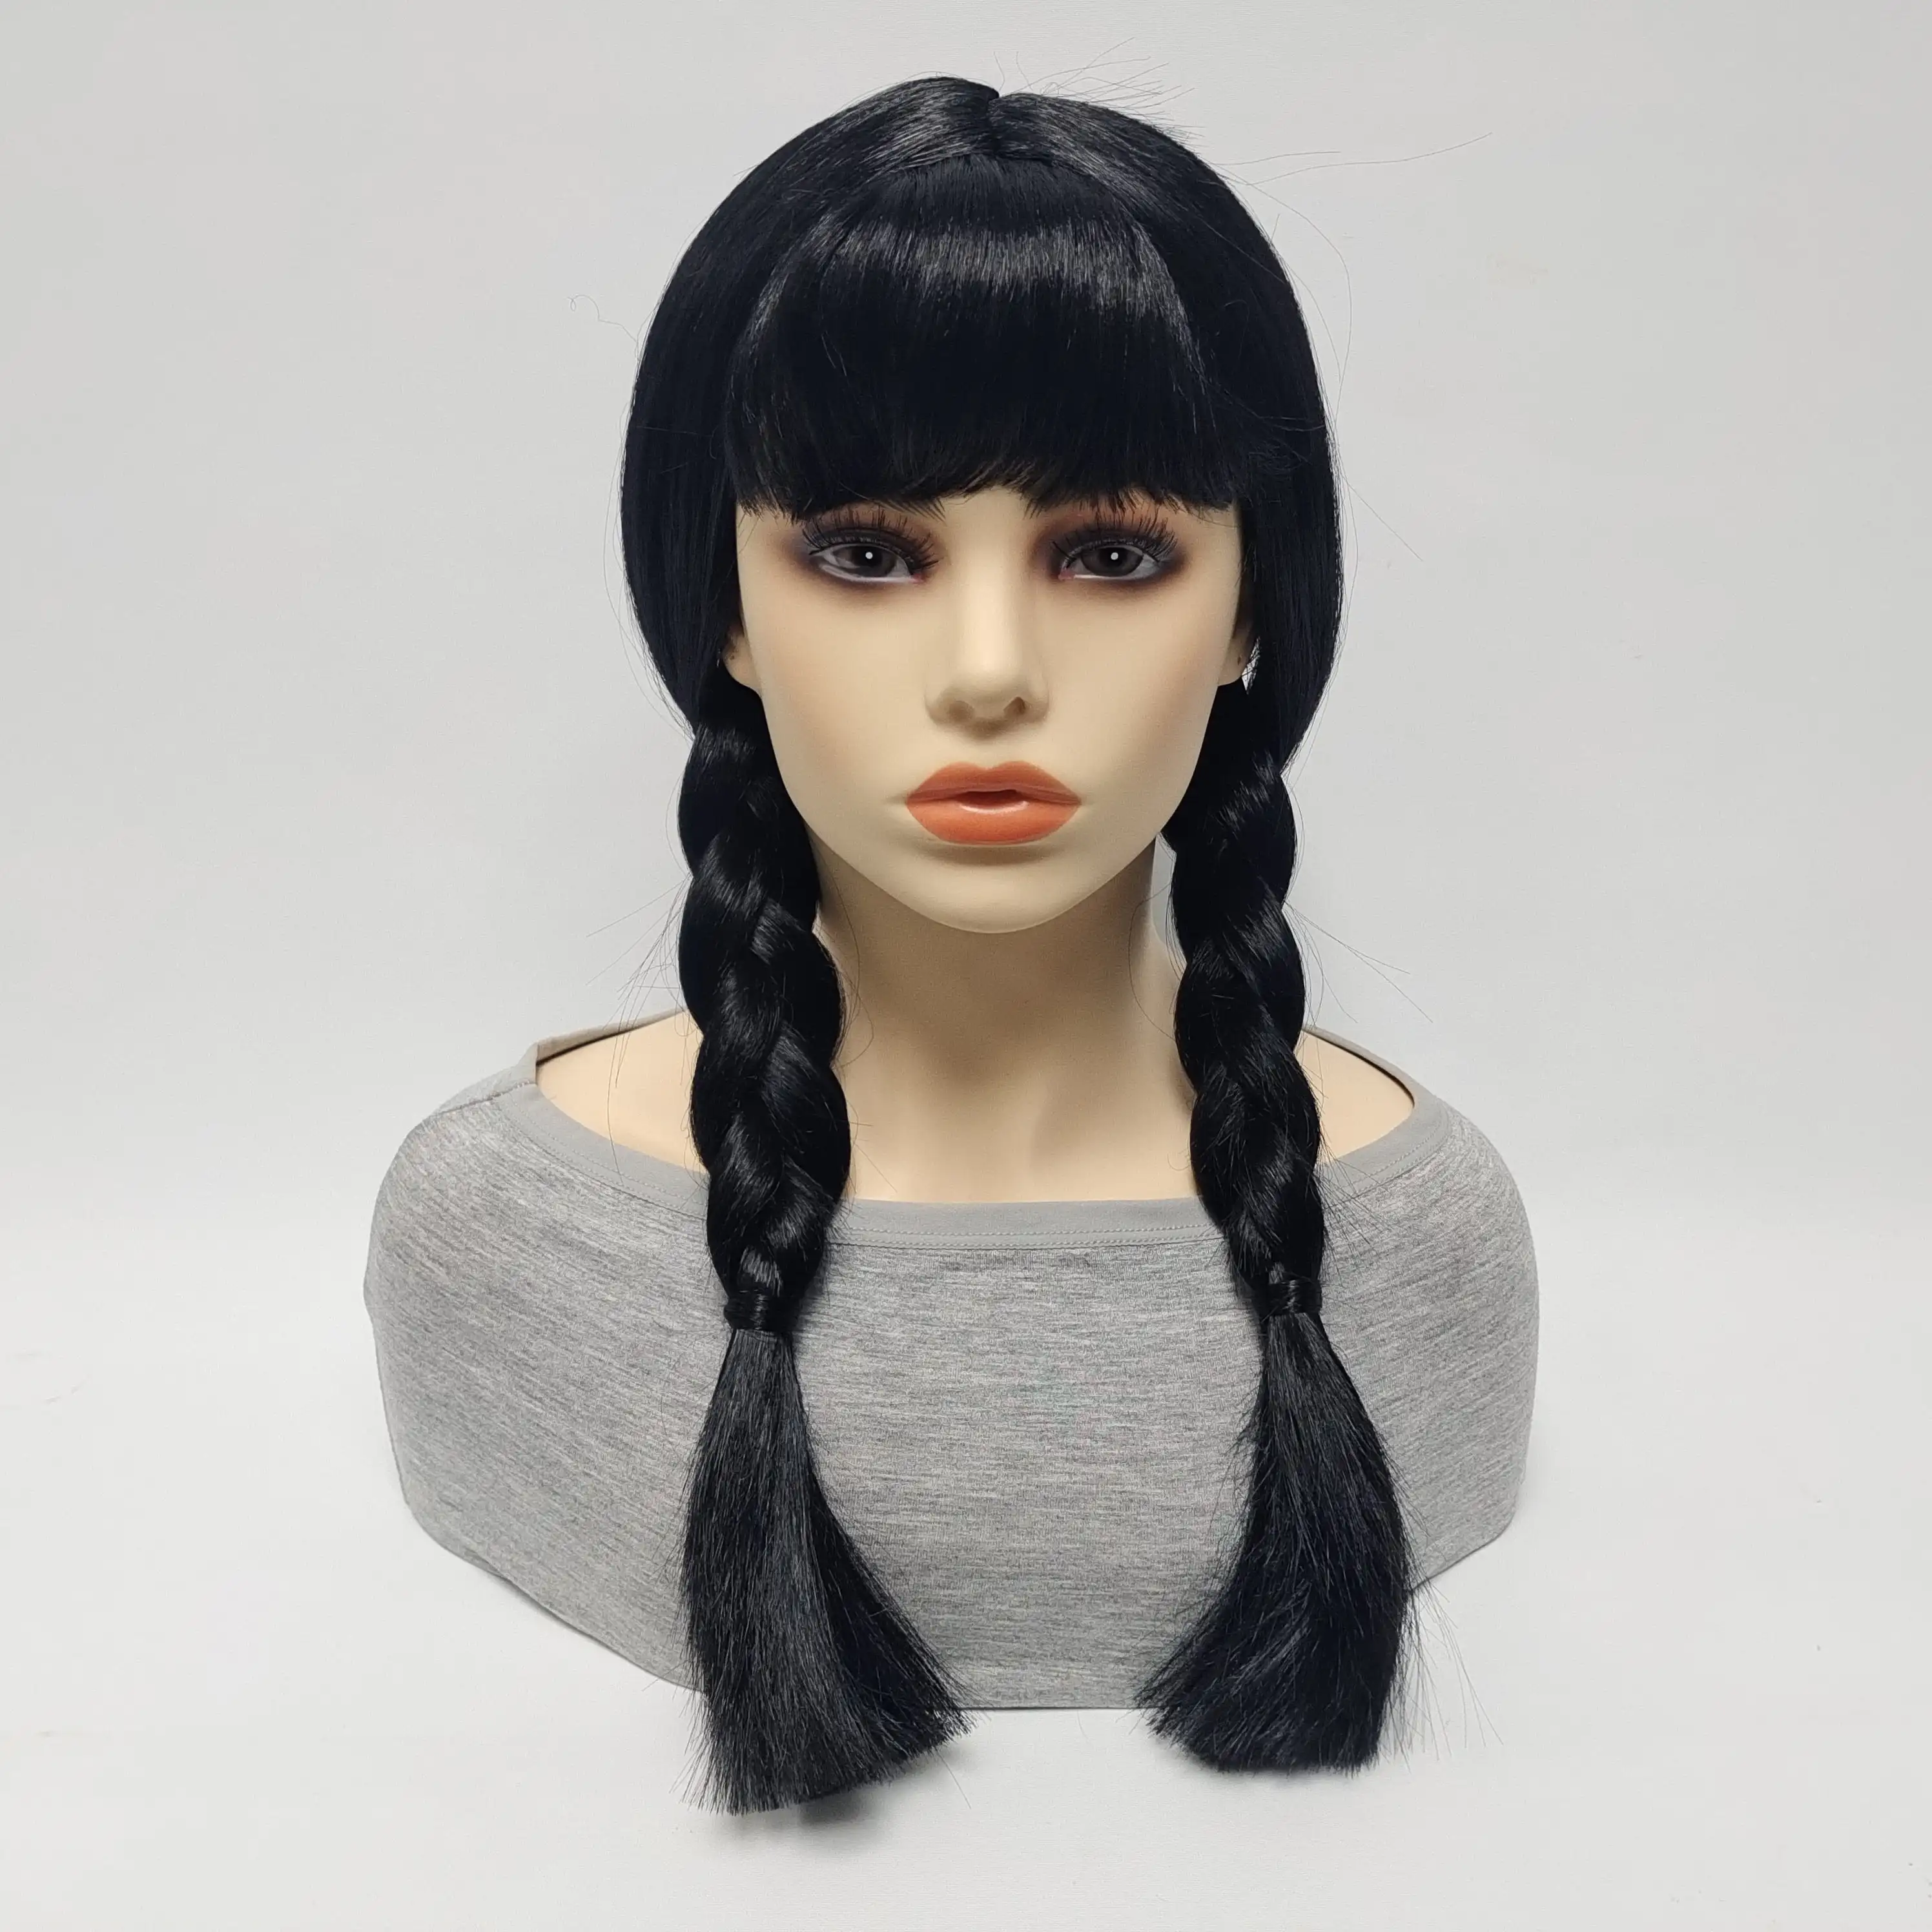 Wednesday Addams Wig For Women Cosplay Black Two Braids Fashion Synthetic Wig High Quality Free Shipping And Cheap Item Wigs